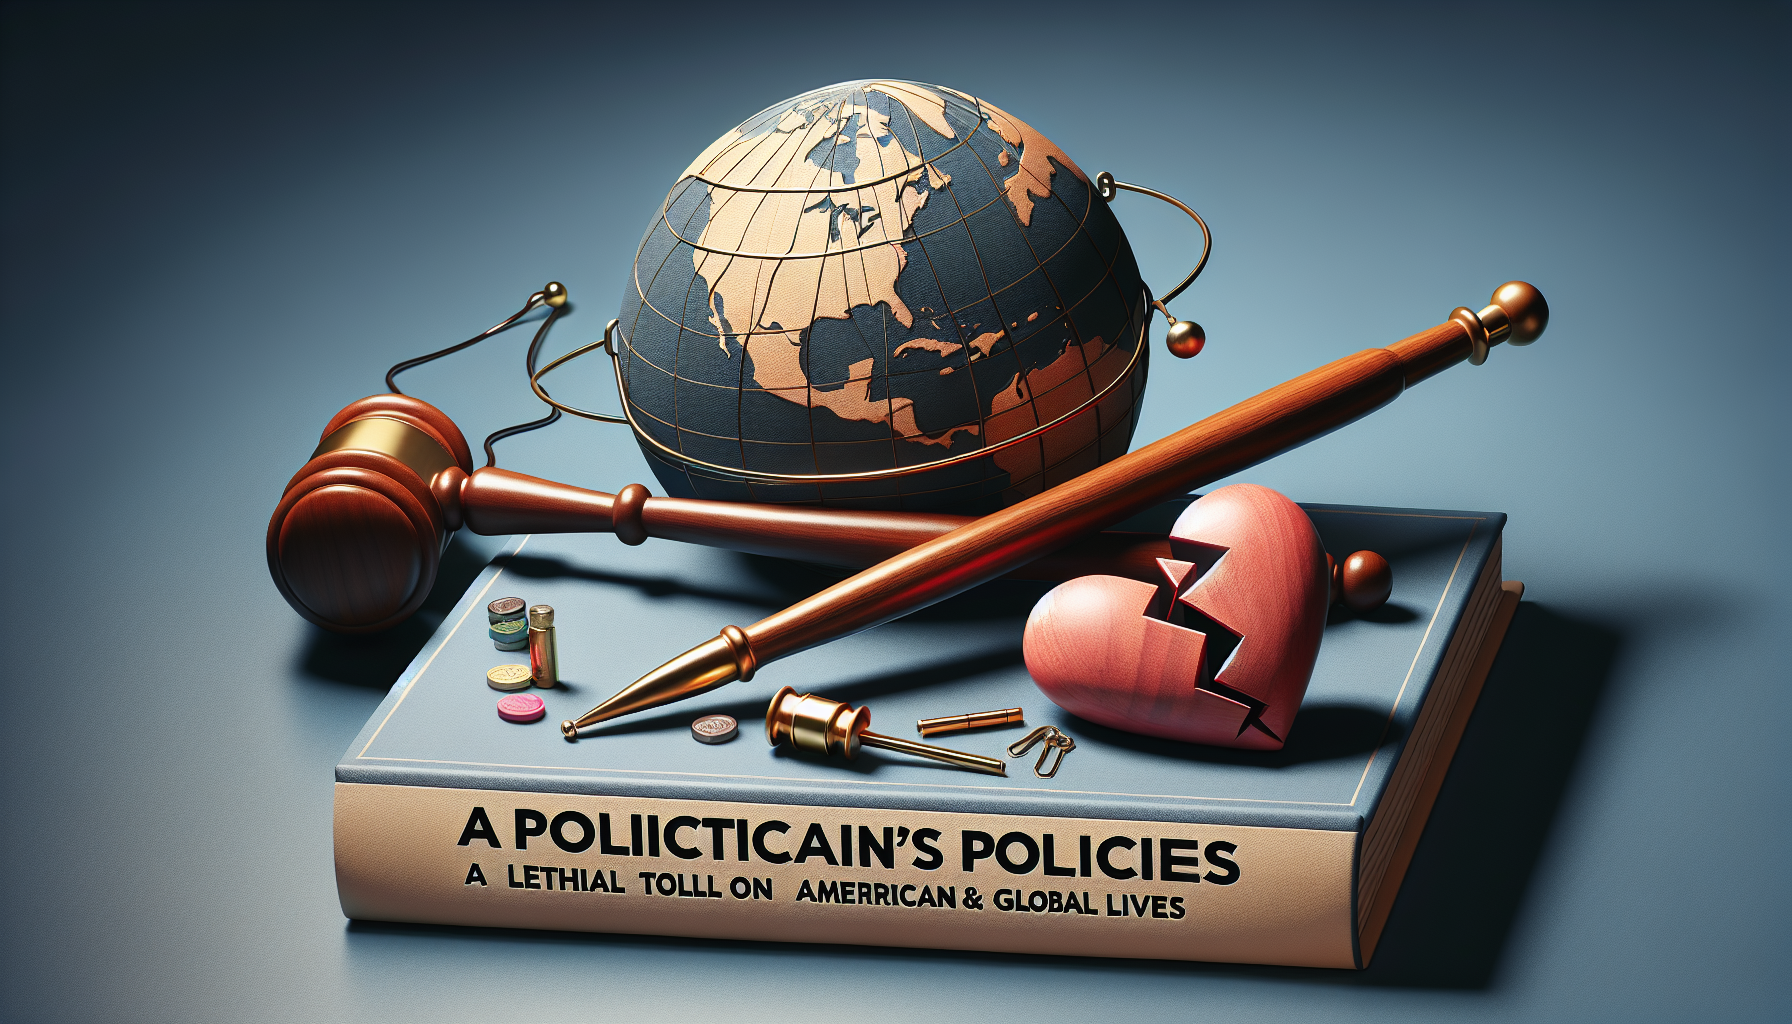 Create an image that represents the title "Biden's Policies: A Lethal Toll on American & Global Lives"